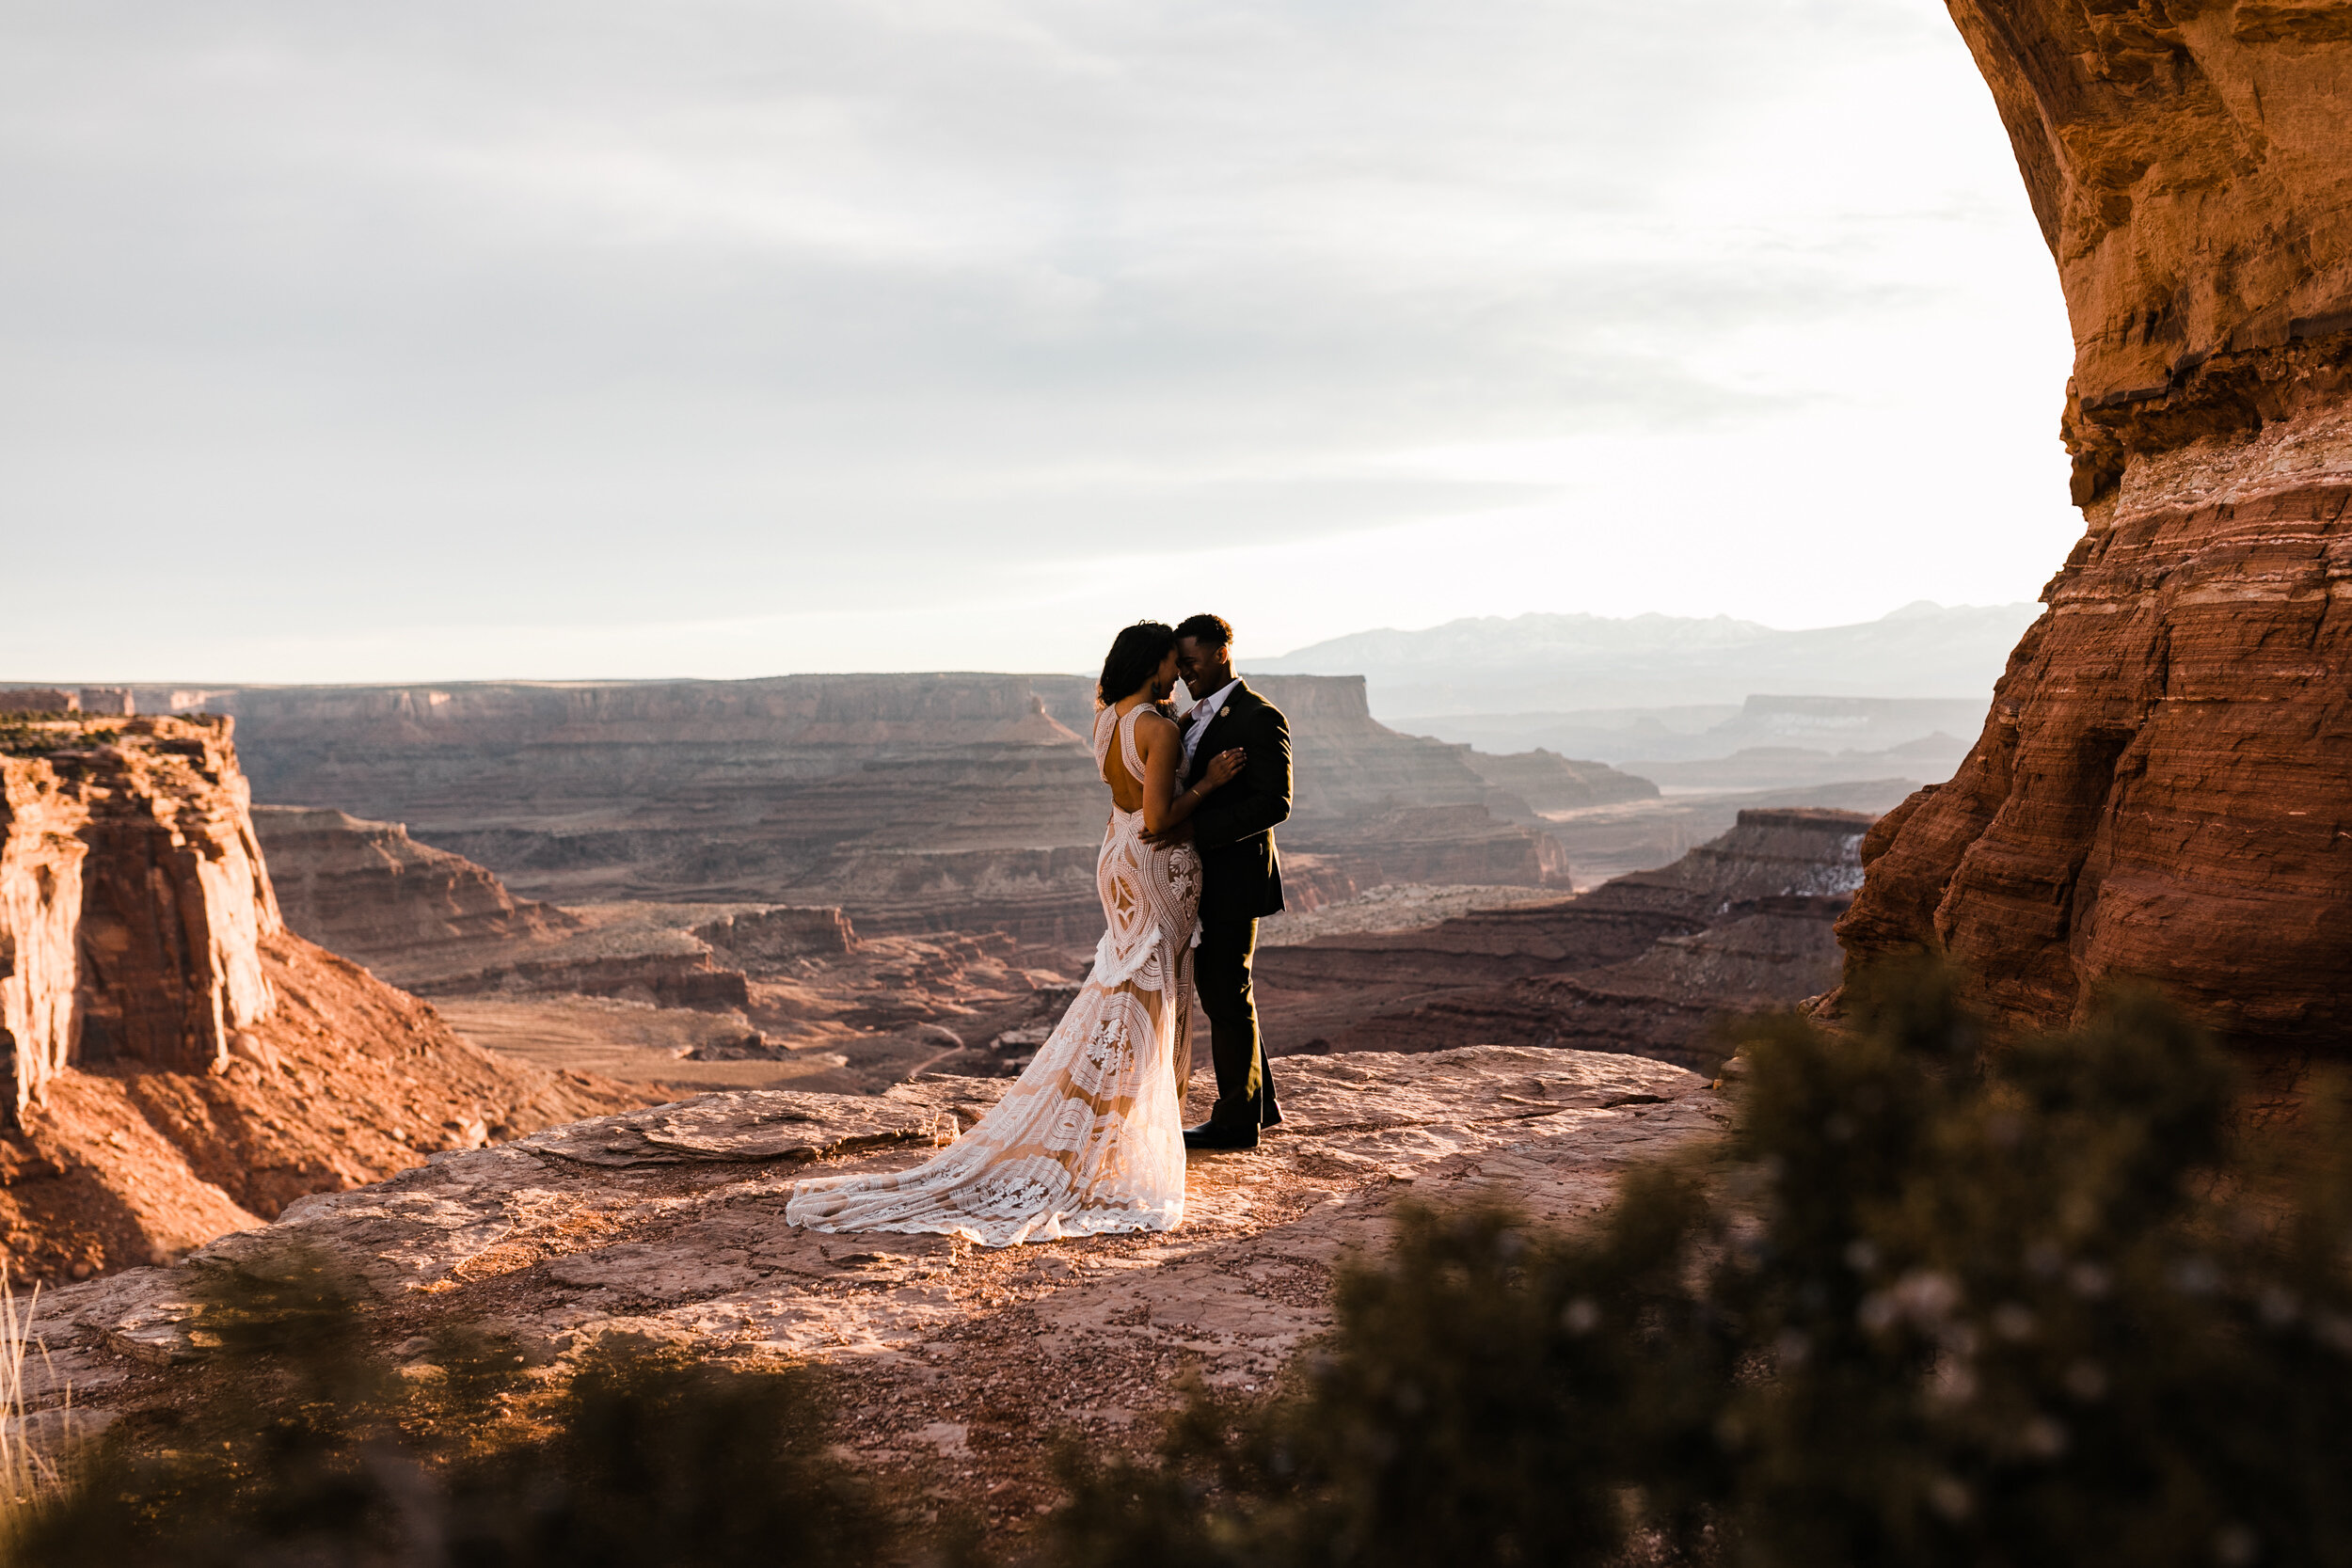 This Moab Elopement in Canyonlands National Park is major desert wedding inspiration! A surprise proposal at sunrise and Rue De Seine East Gown by The Hearnes Adventure Photography